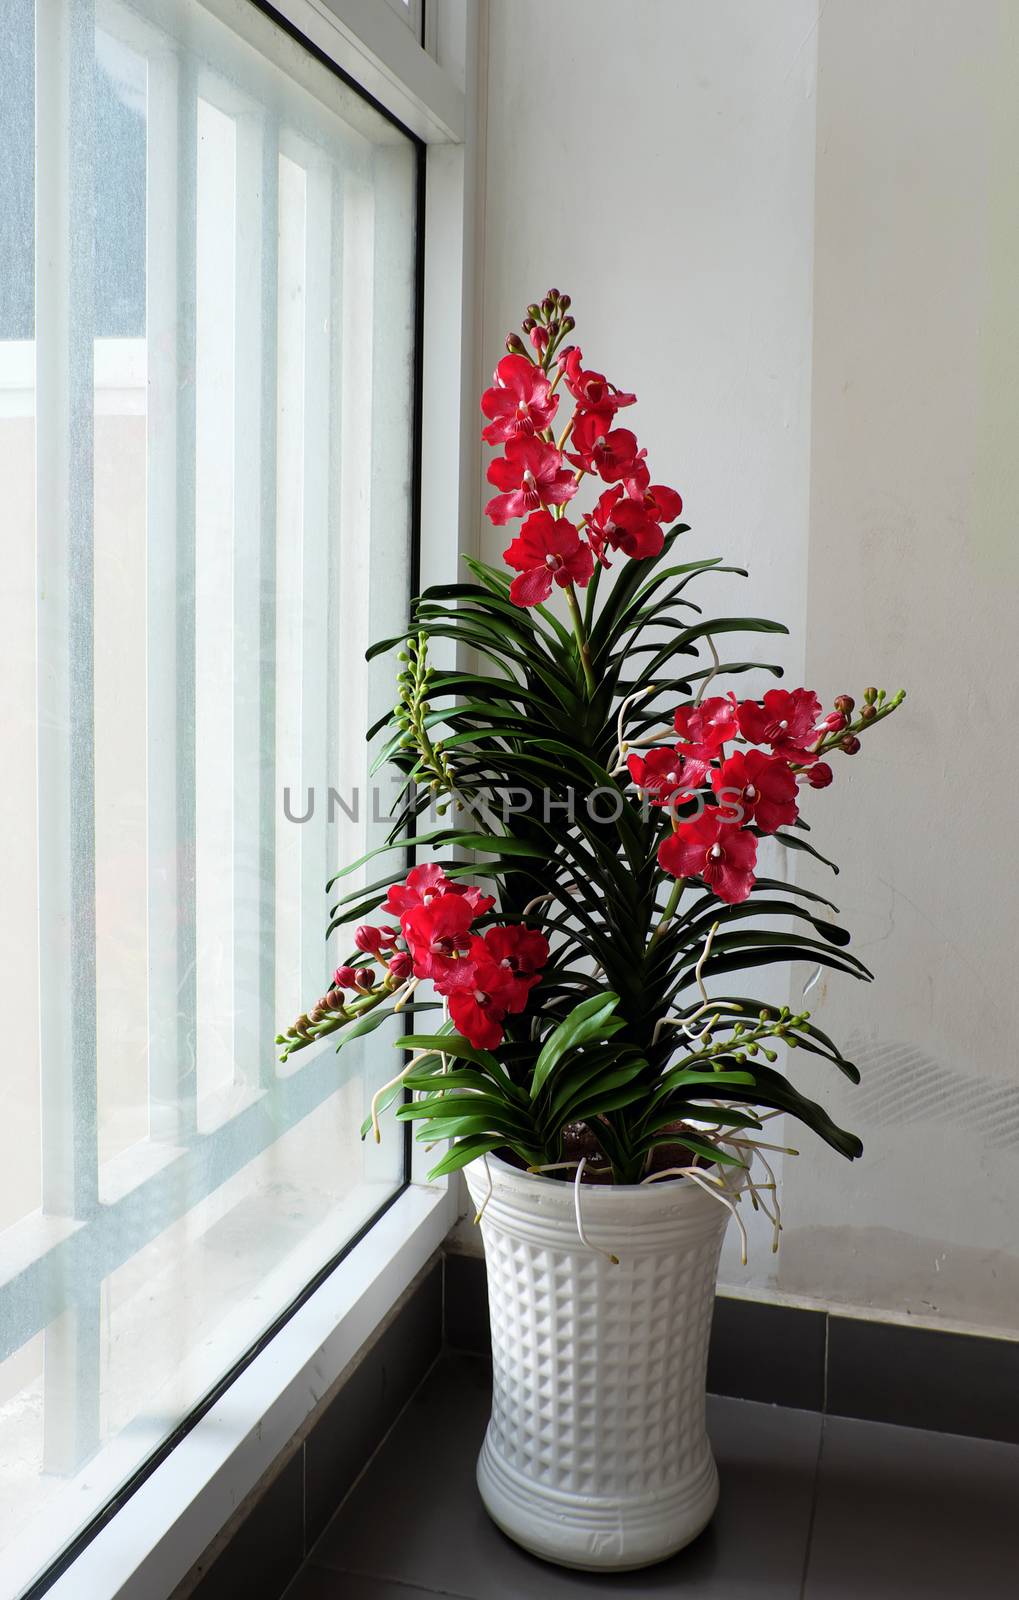 Elegance handmade product from clay art, Vanda orchid pot on white background, beautiful flower for home decor with red petal, green leaf from clay